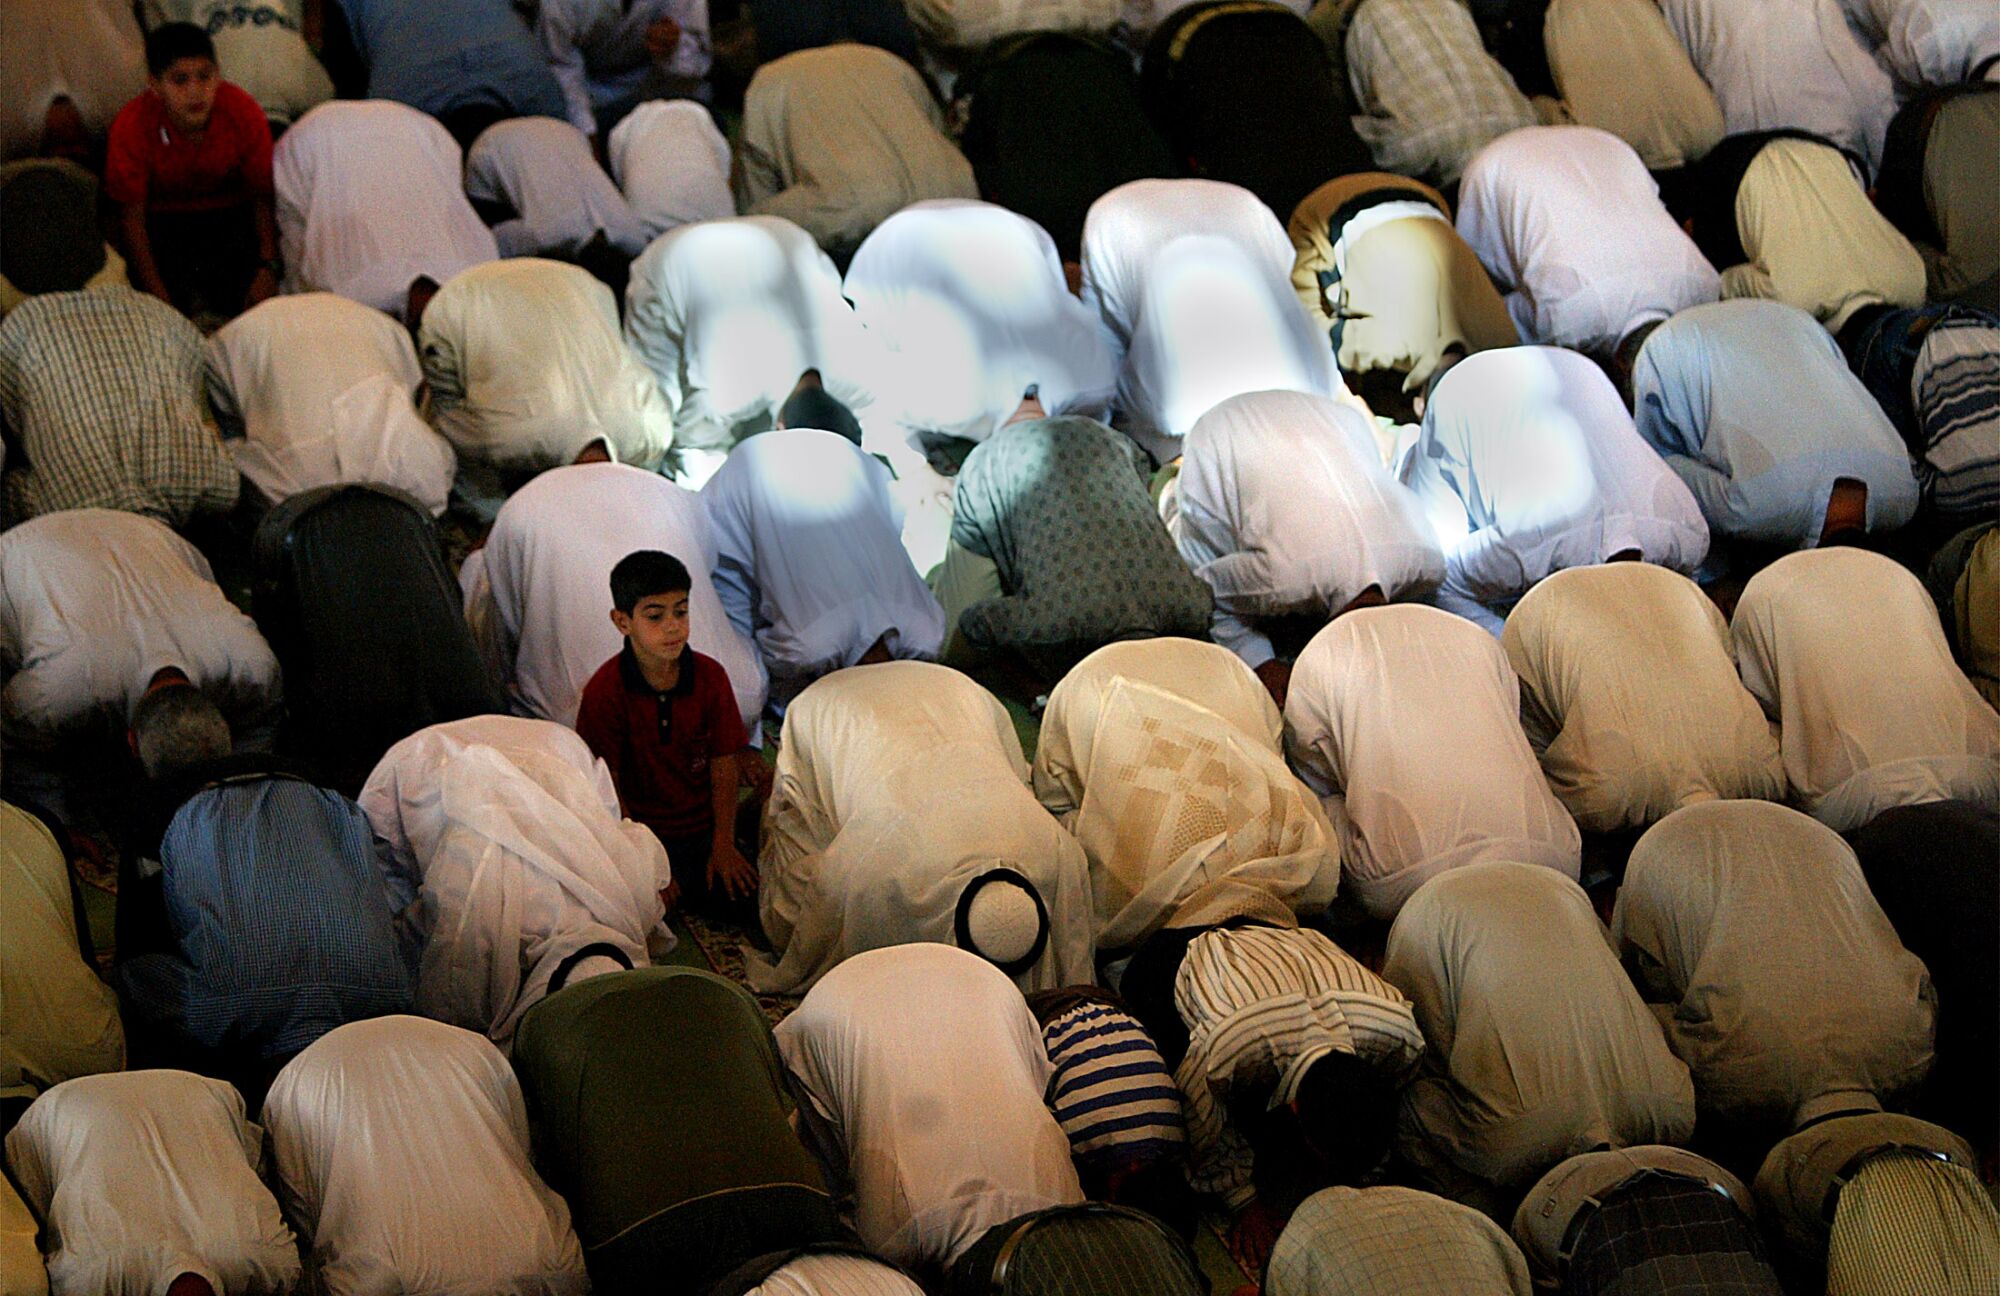 A boy sits up amid rows of people bowed over on the floor in prayer